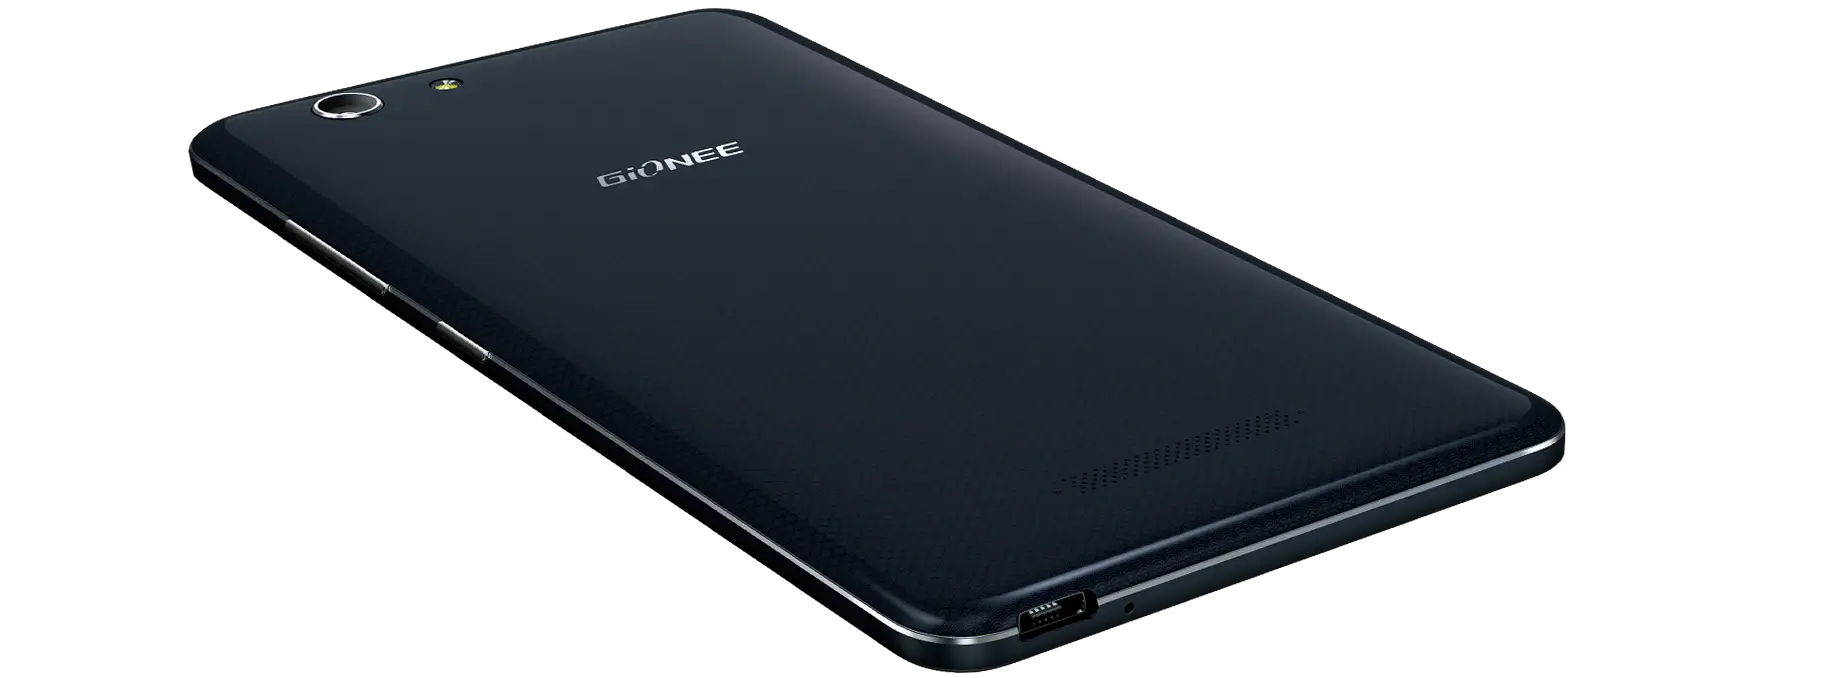 Flash Stock Rom on Gionee S Plus 0204 T6006